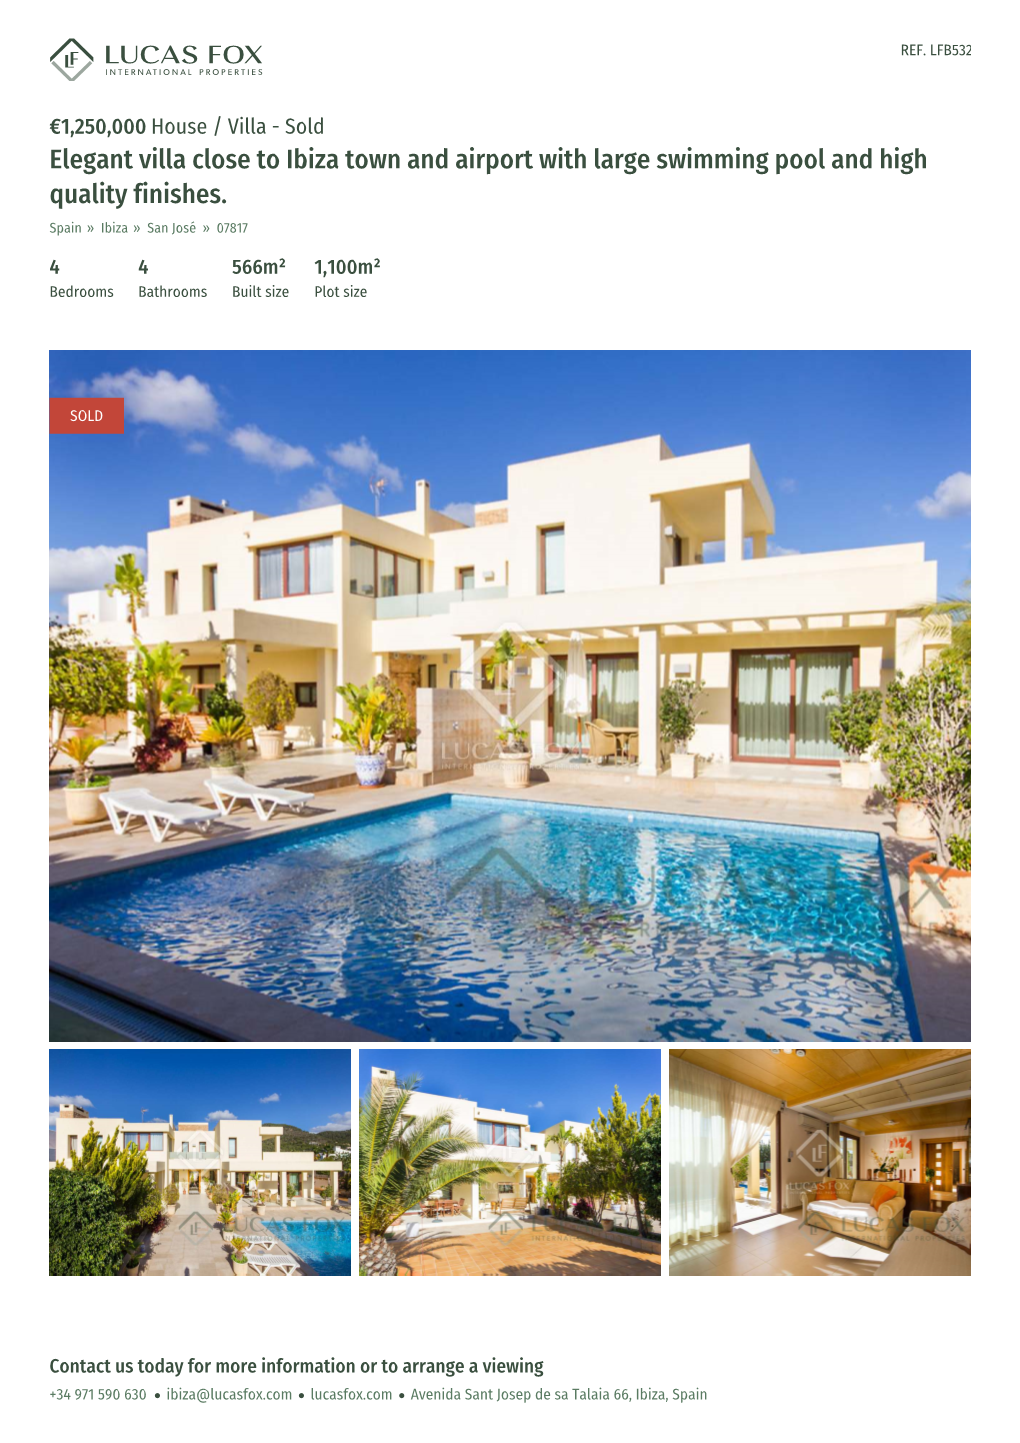 Elegant Villa Close to Ibiza Town and Airport with Large Swimming Pool and High Quality Finishes